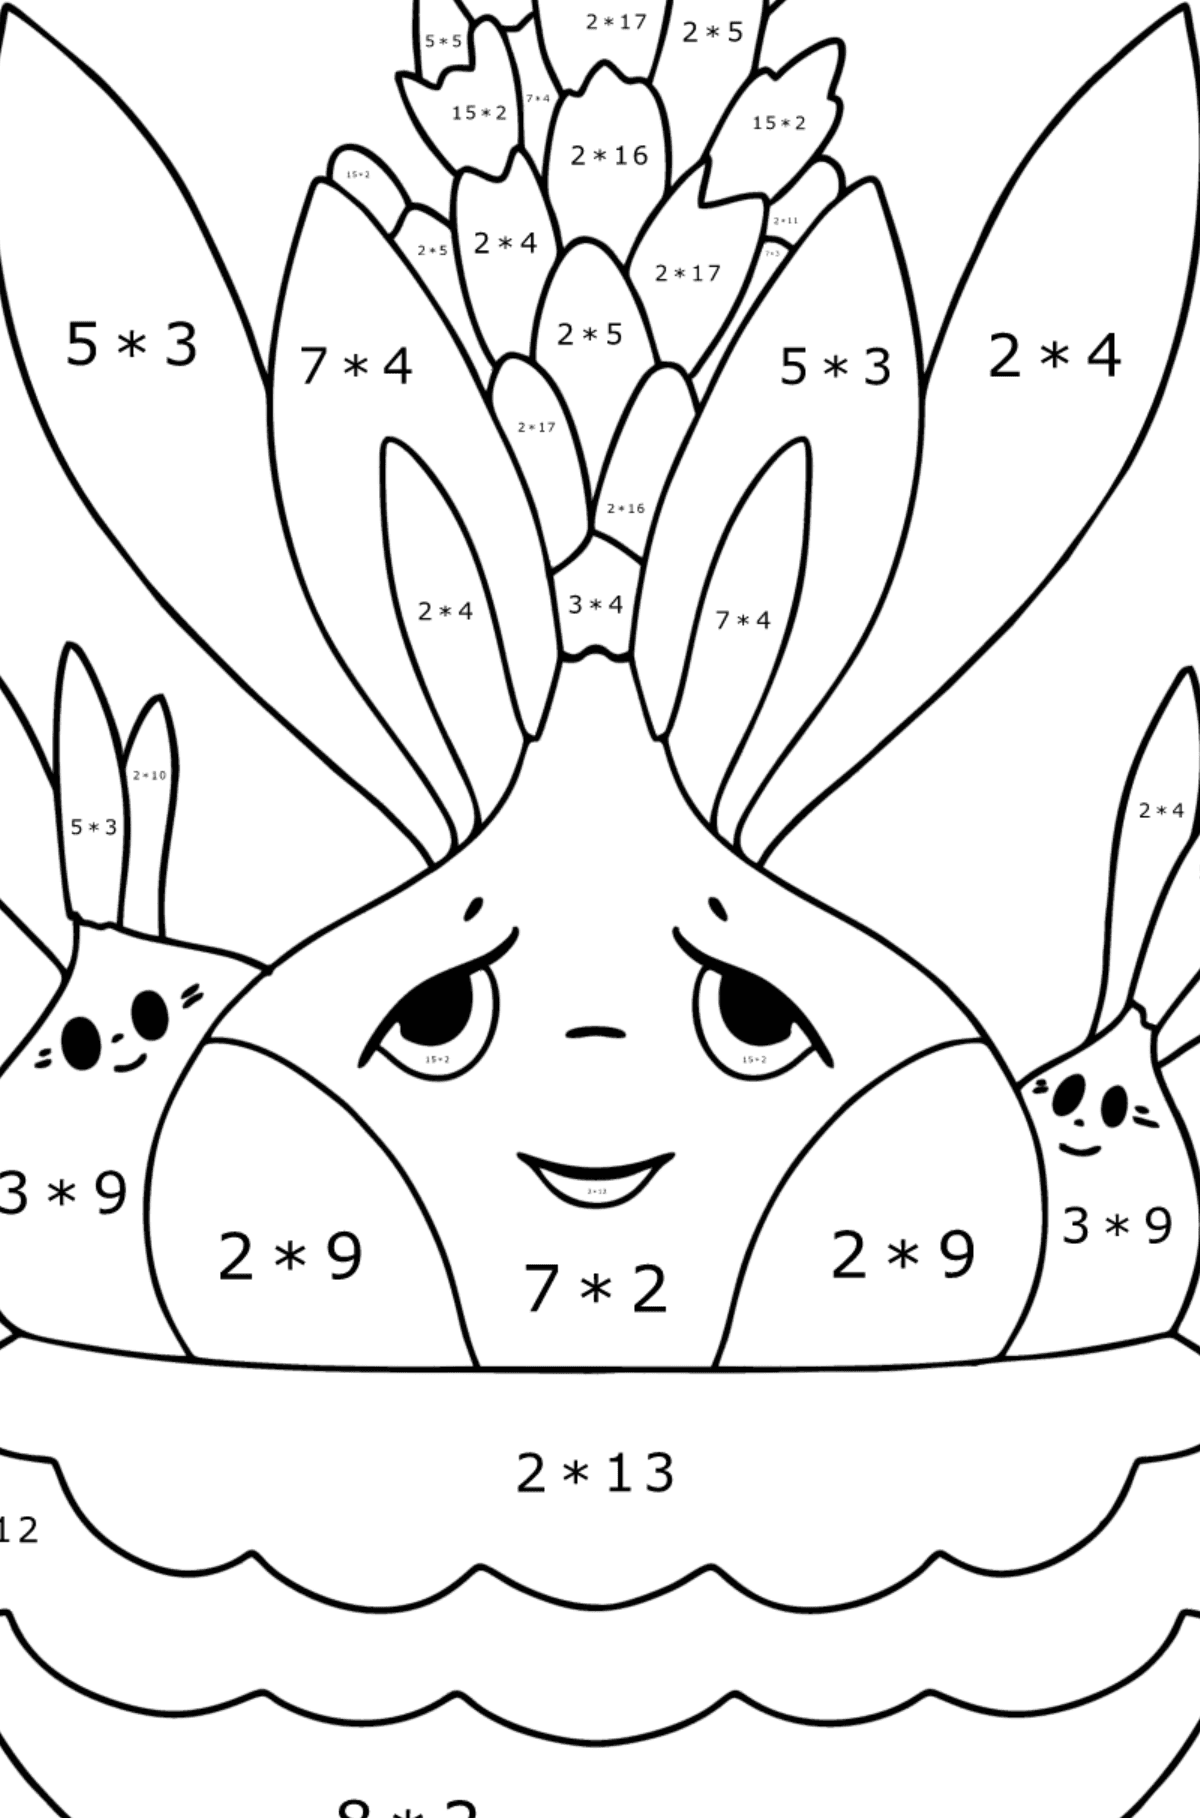 Hyacinth flowers with eyes coloring page - Math Coloring - Multiplication for Kids